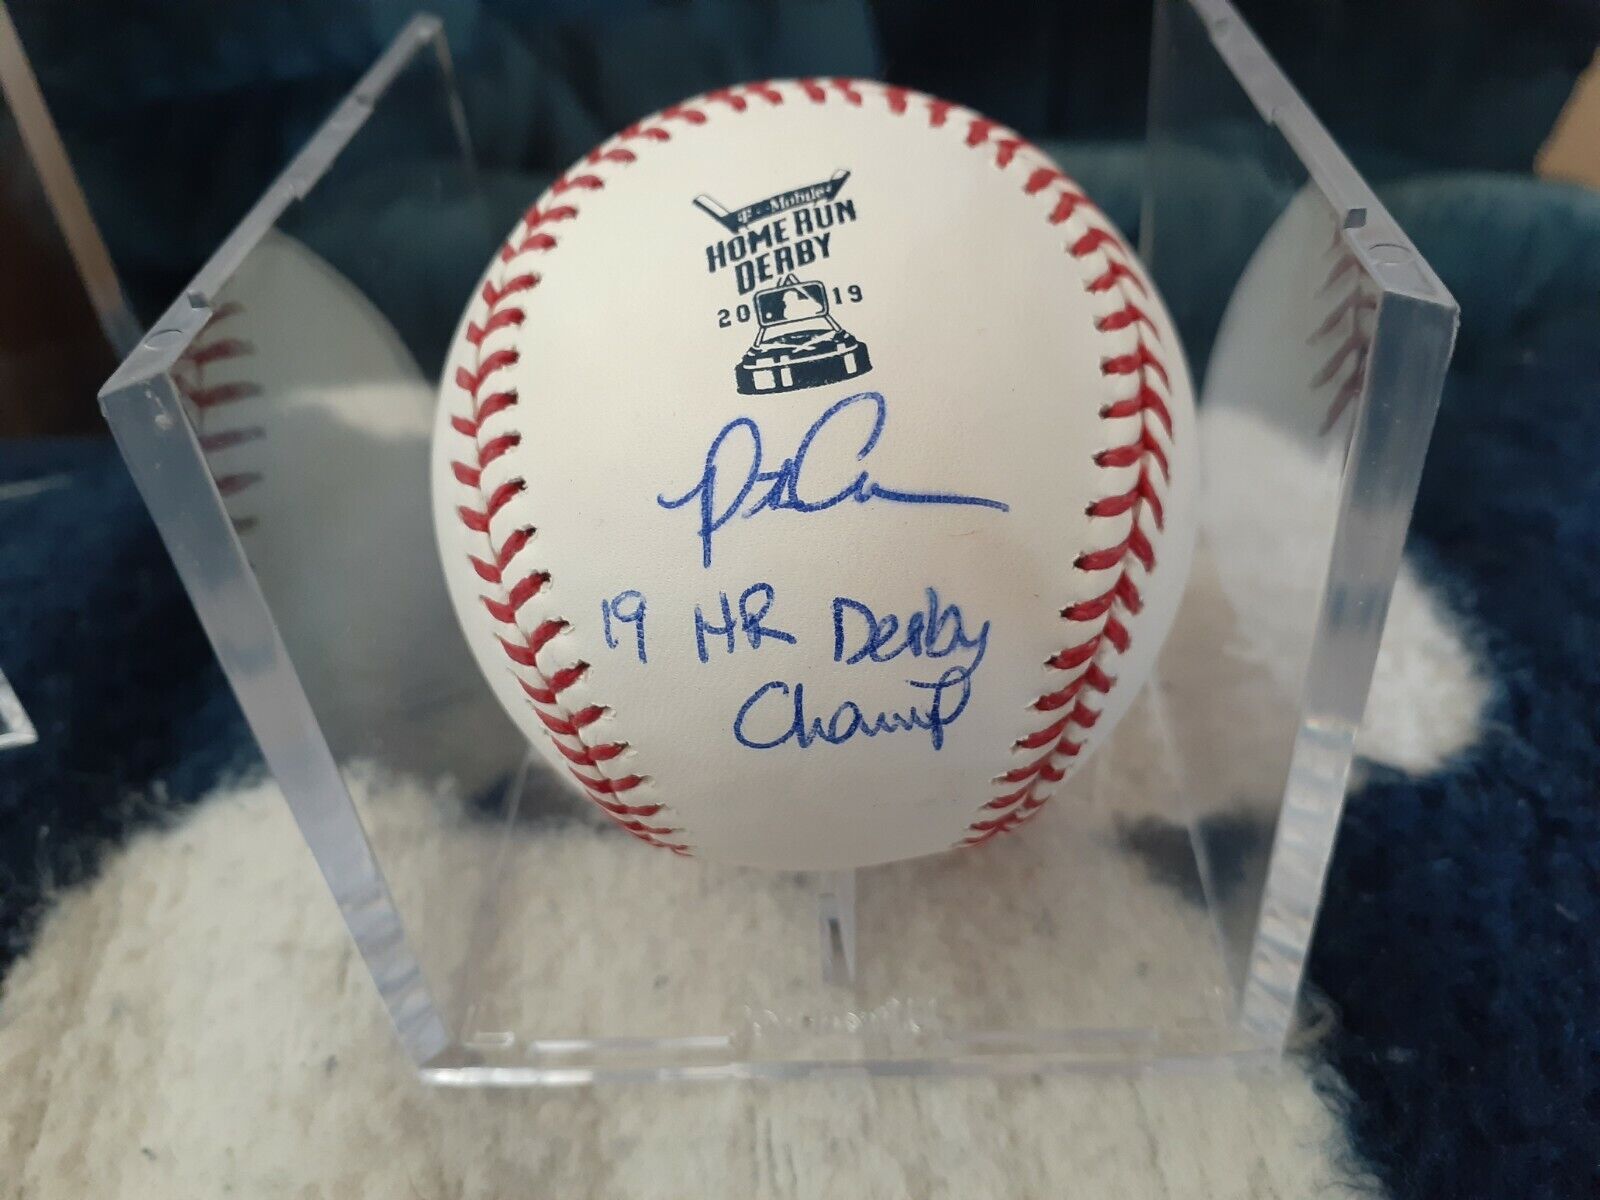 Pete Alonso Signed 19 HR  DERBY BALL with 19 HR DERBY CHAMP INSC with FANATICS